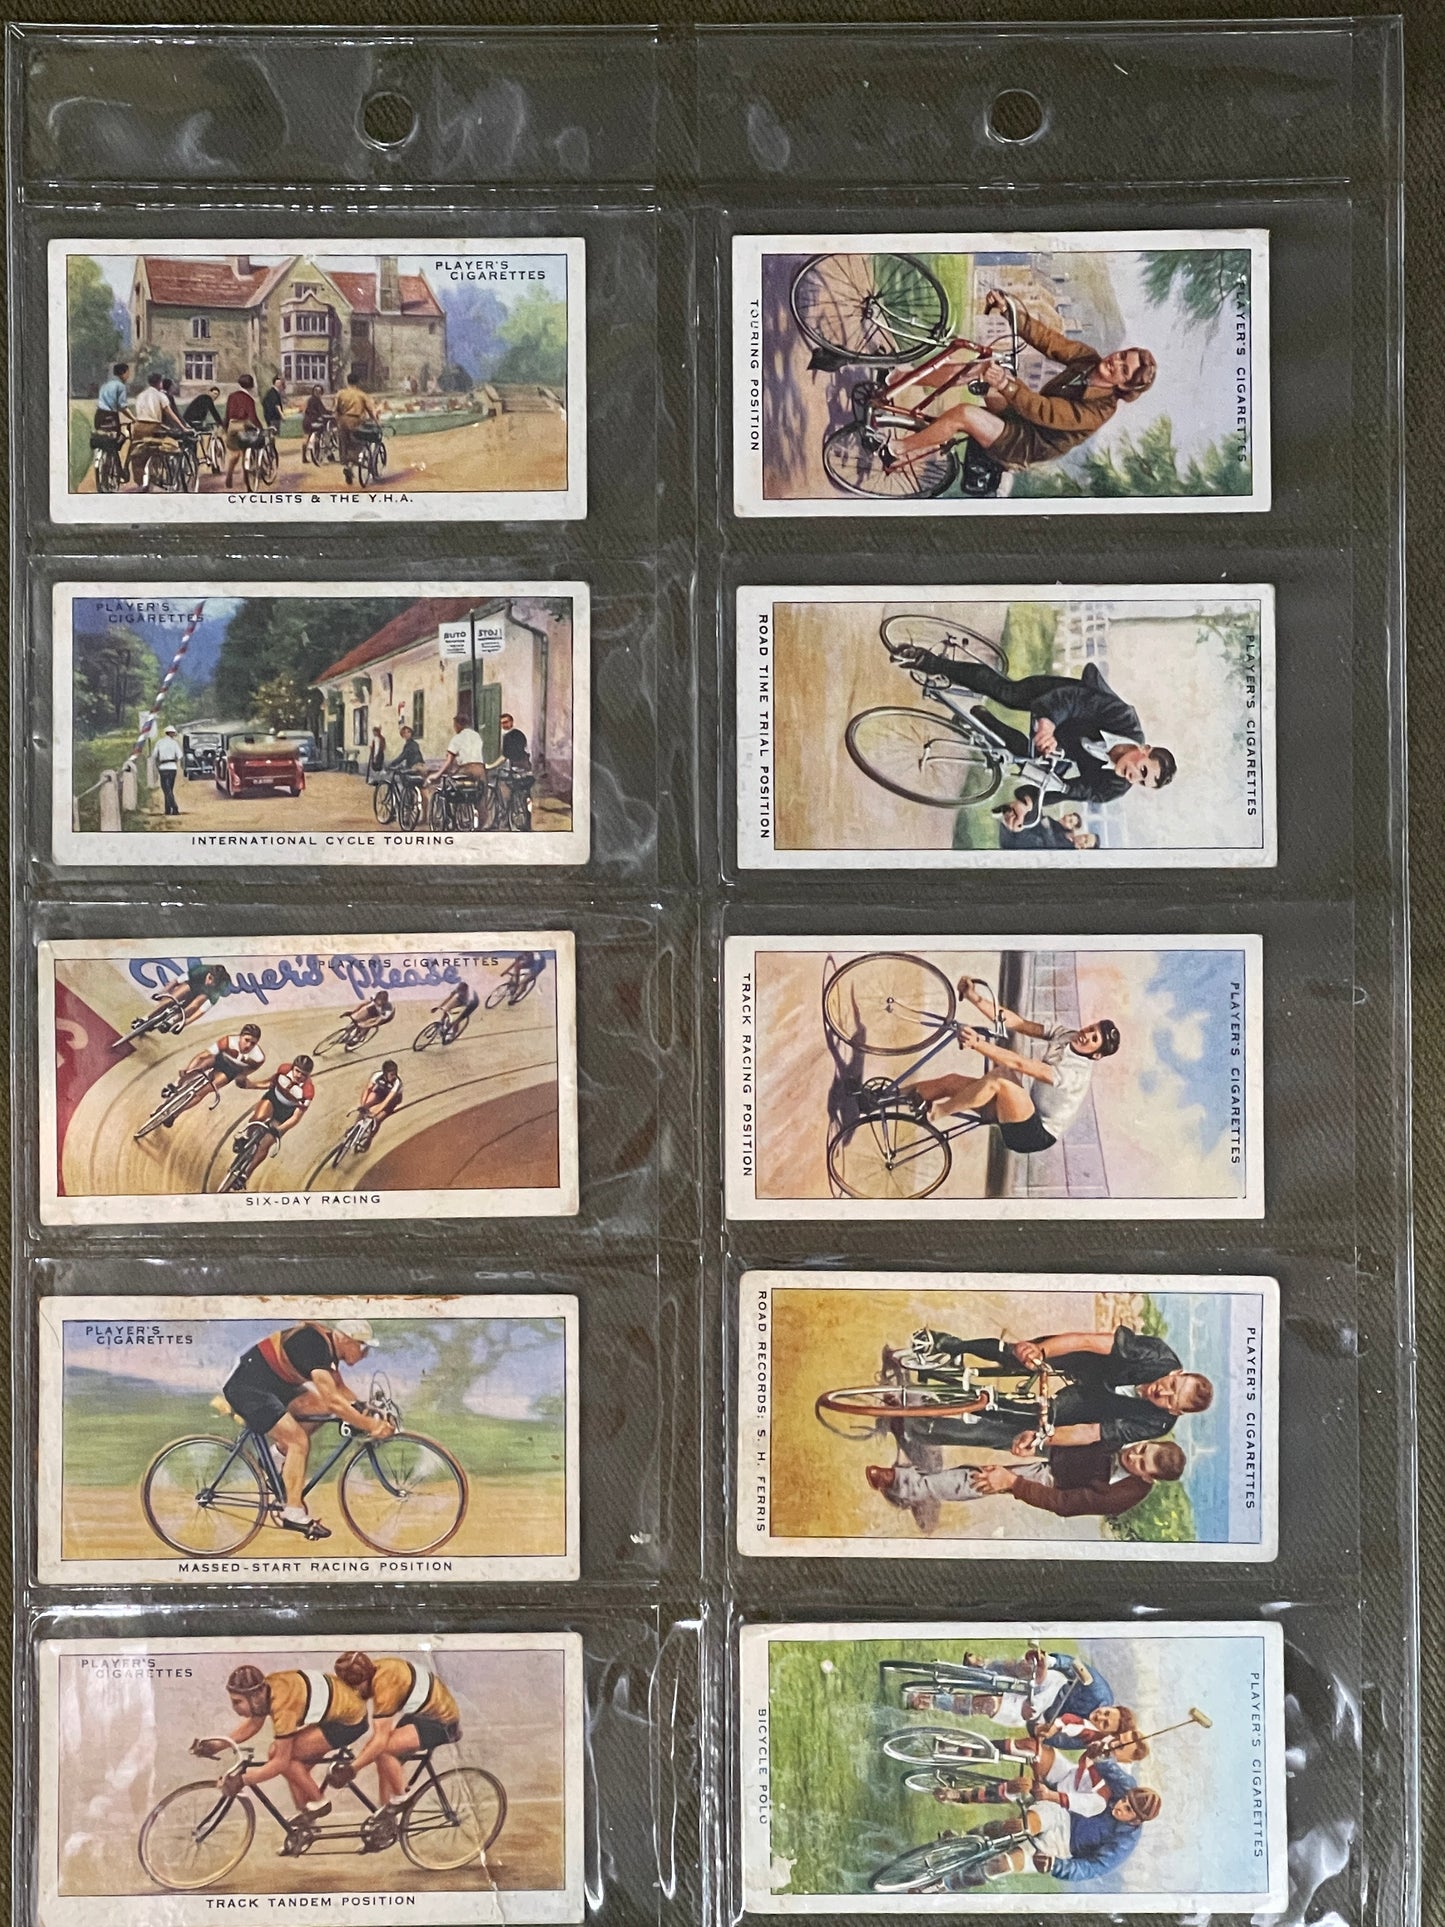 John Player & Sons Cycling Cigarette Cards 1939